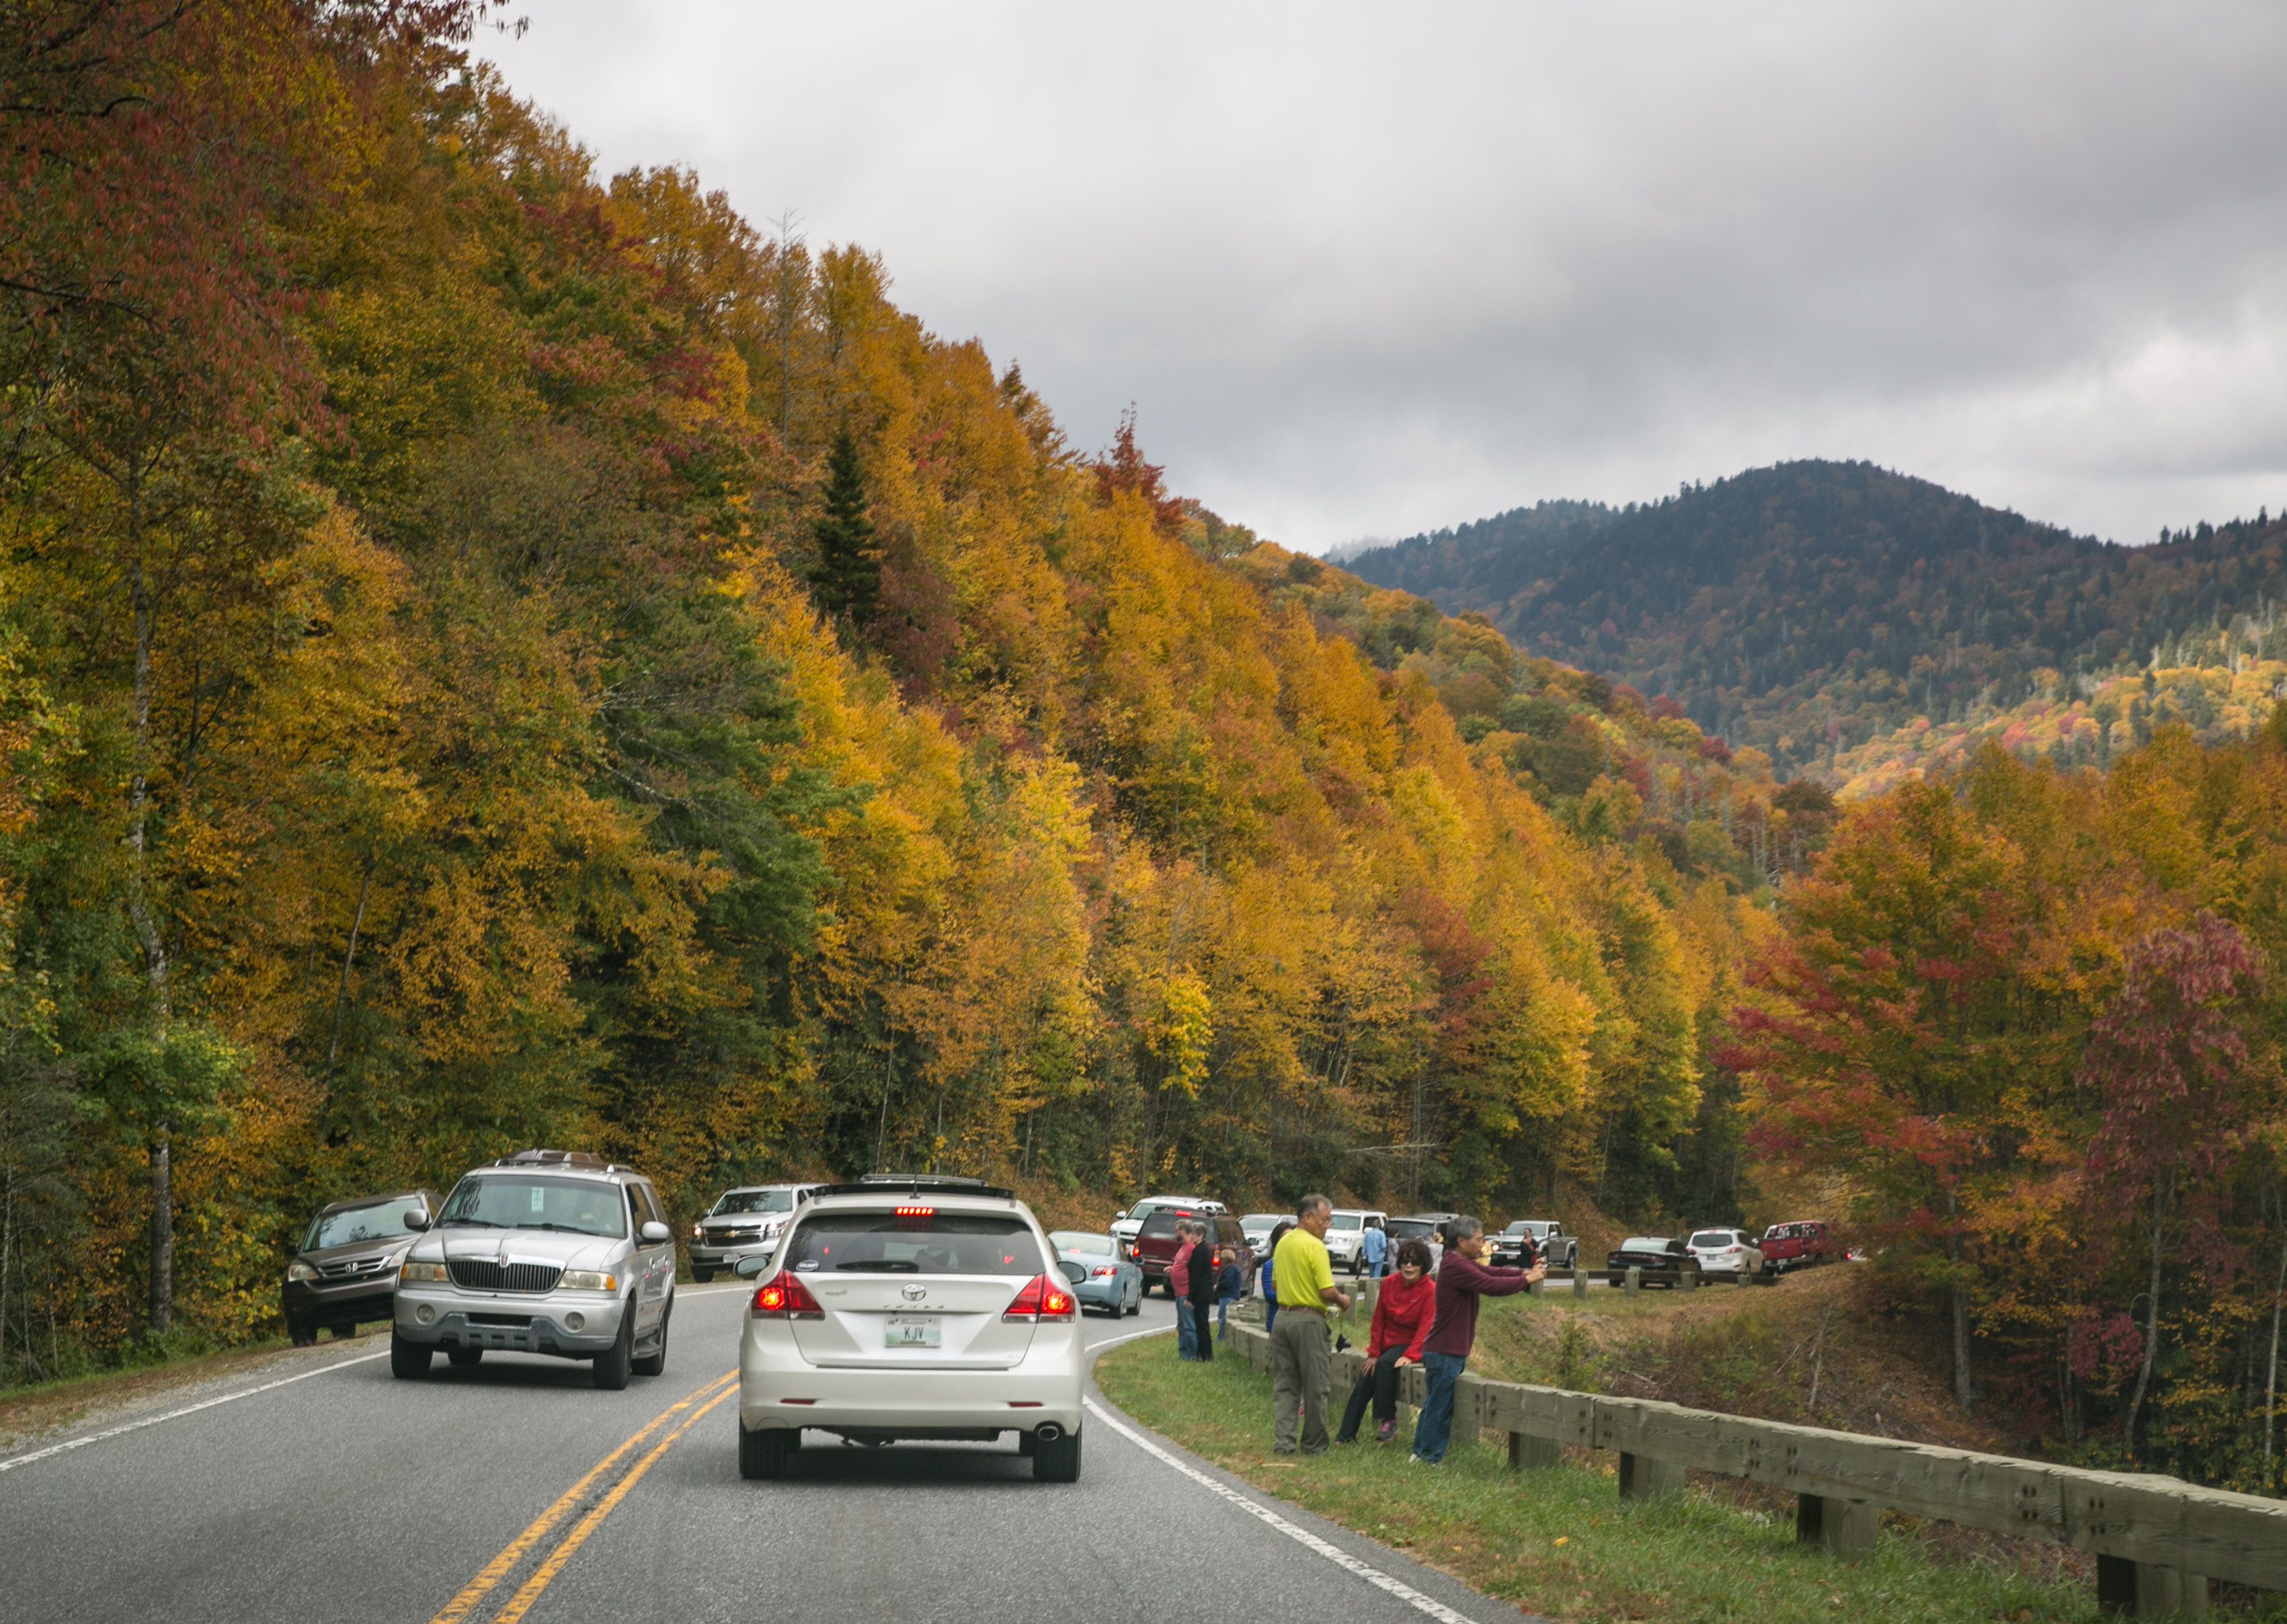 Cars park along the road to look at leaves changing colors during the fall.